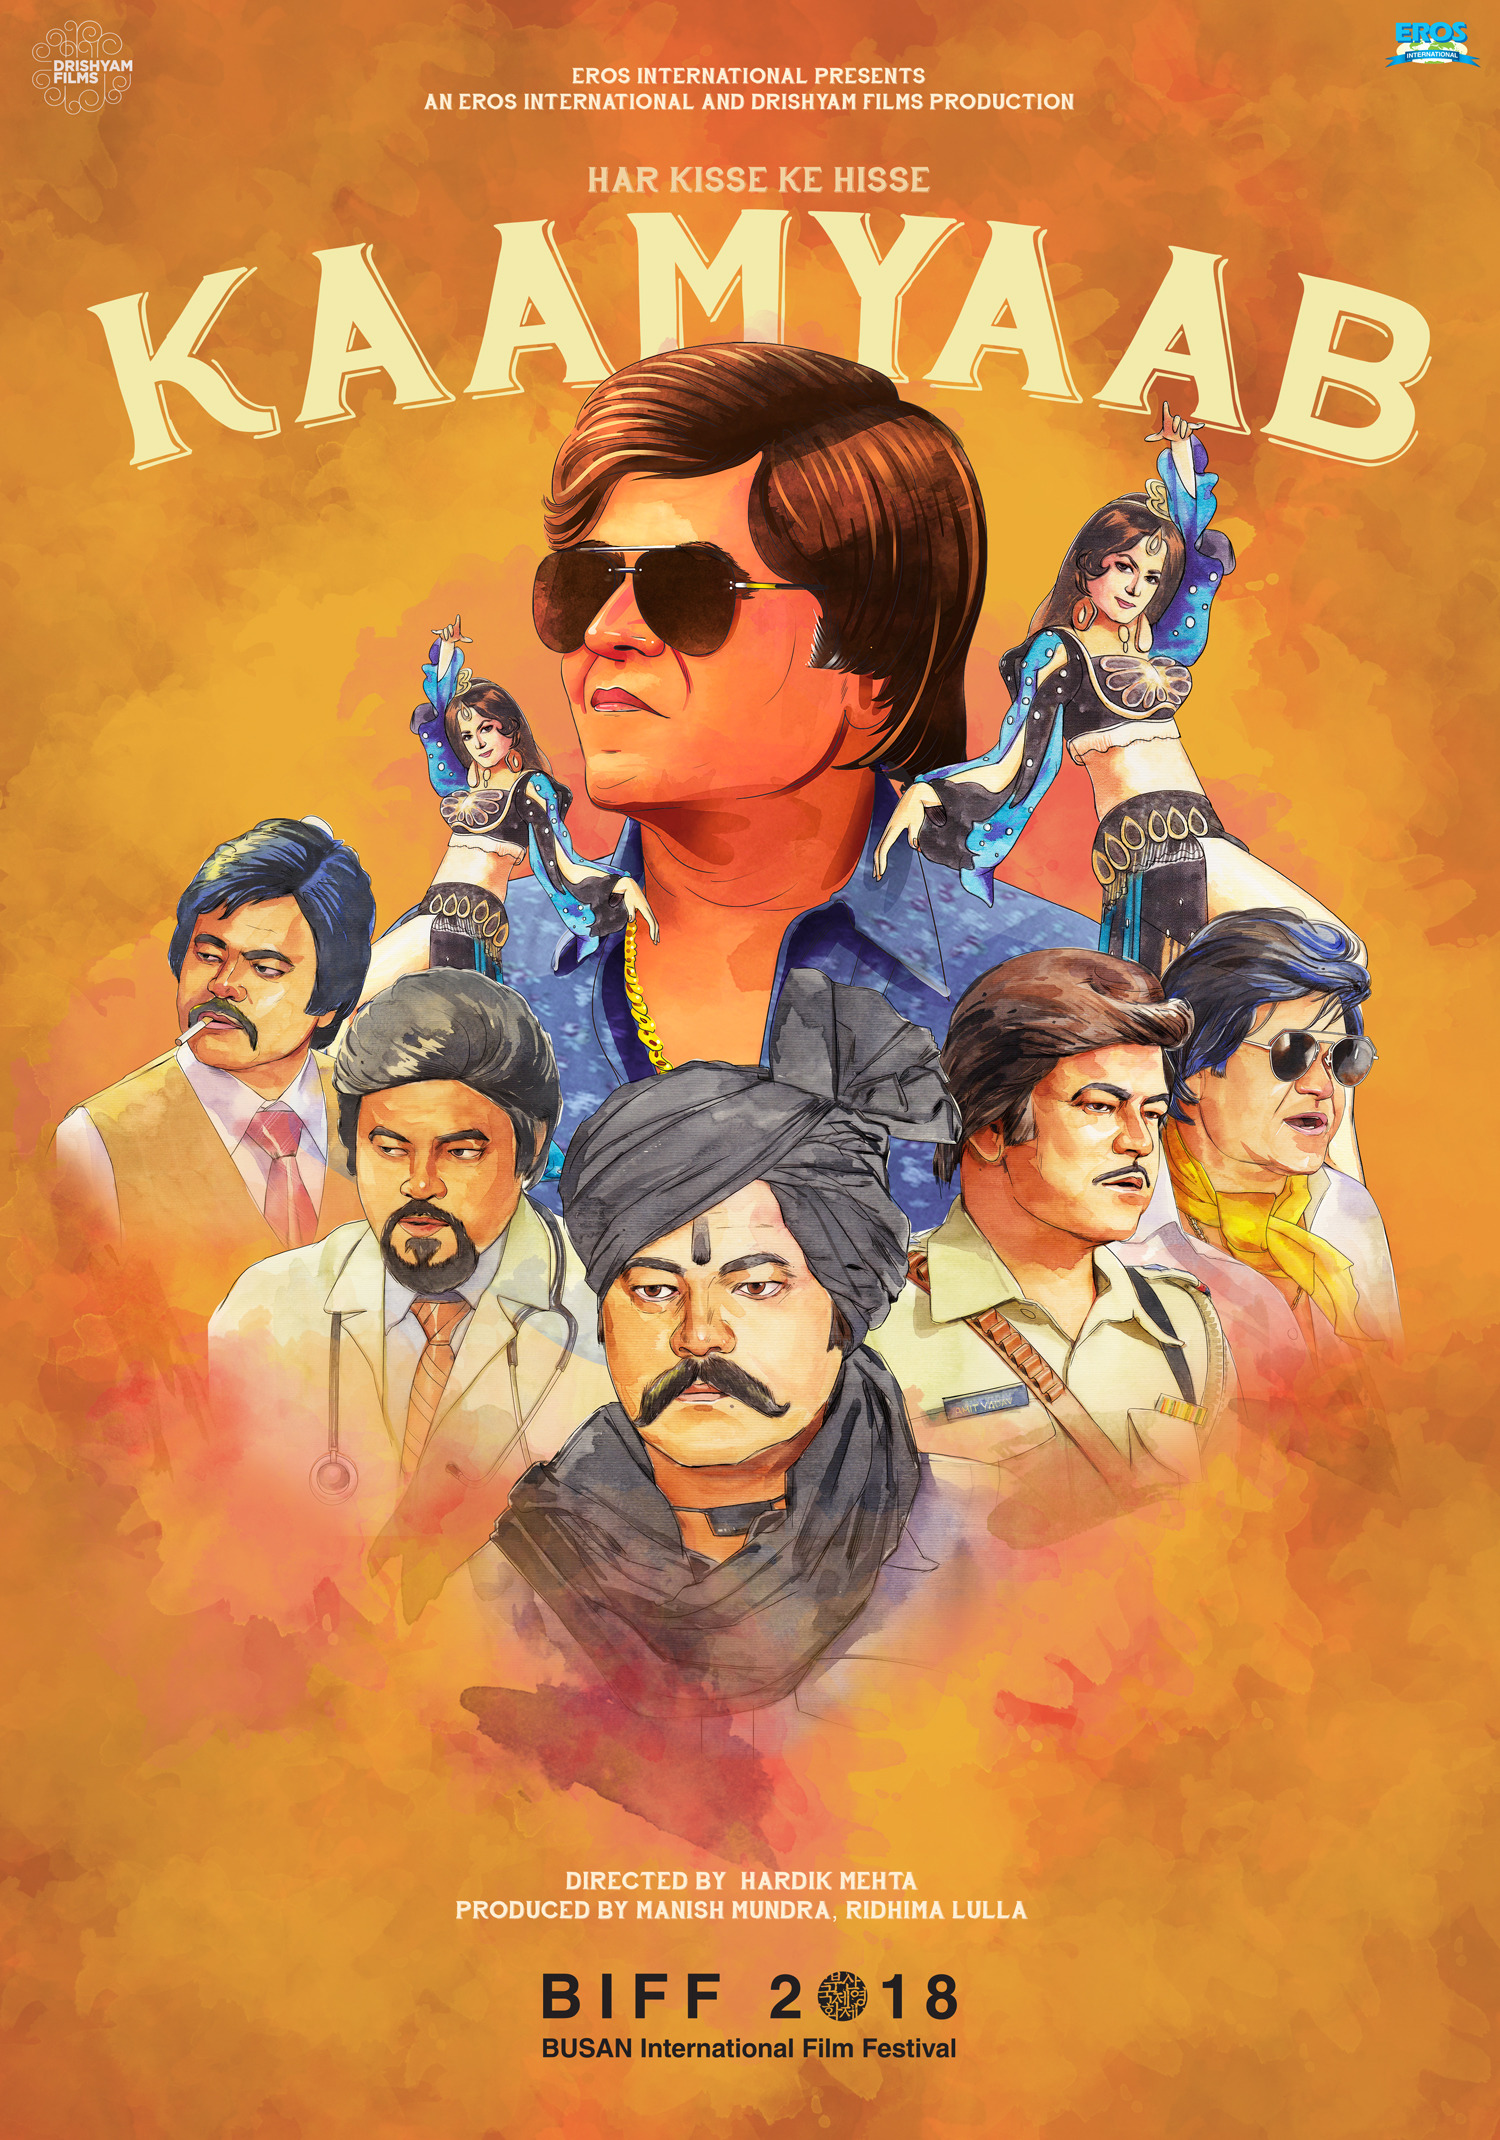 Mega Sized Movie Poster Image for Kaamyaab (#1 of 4)